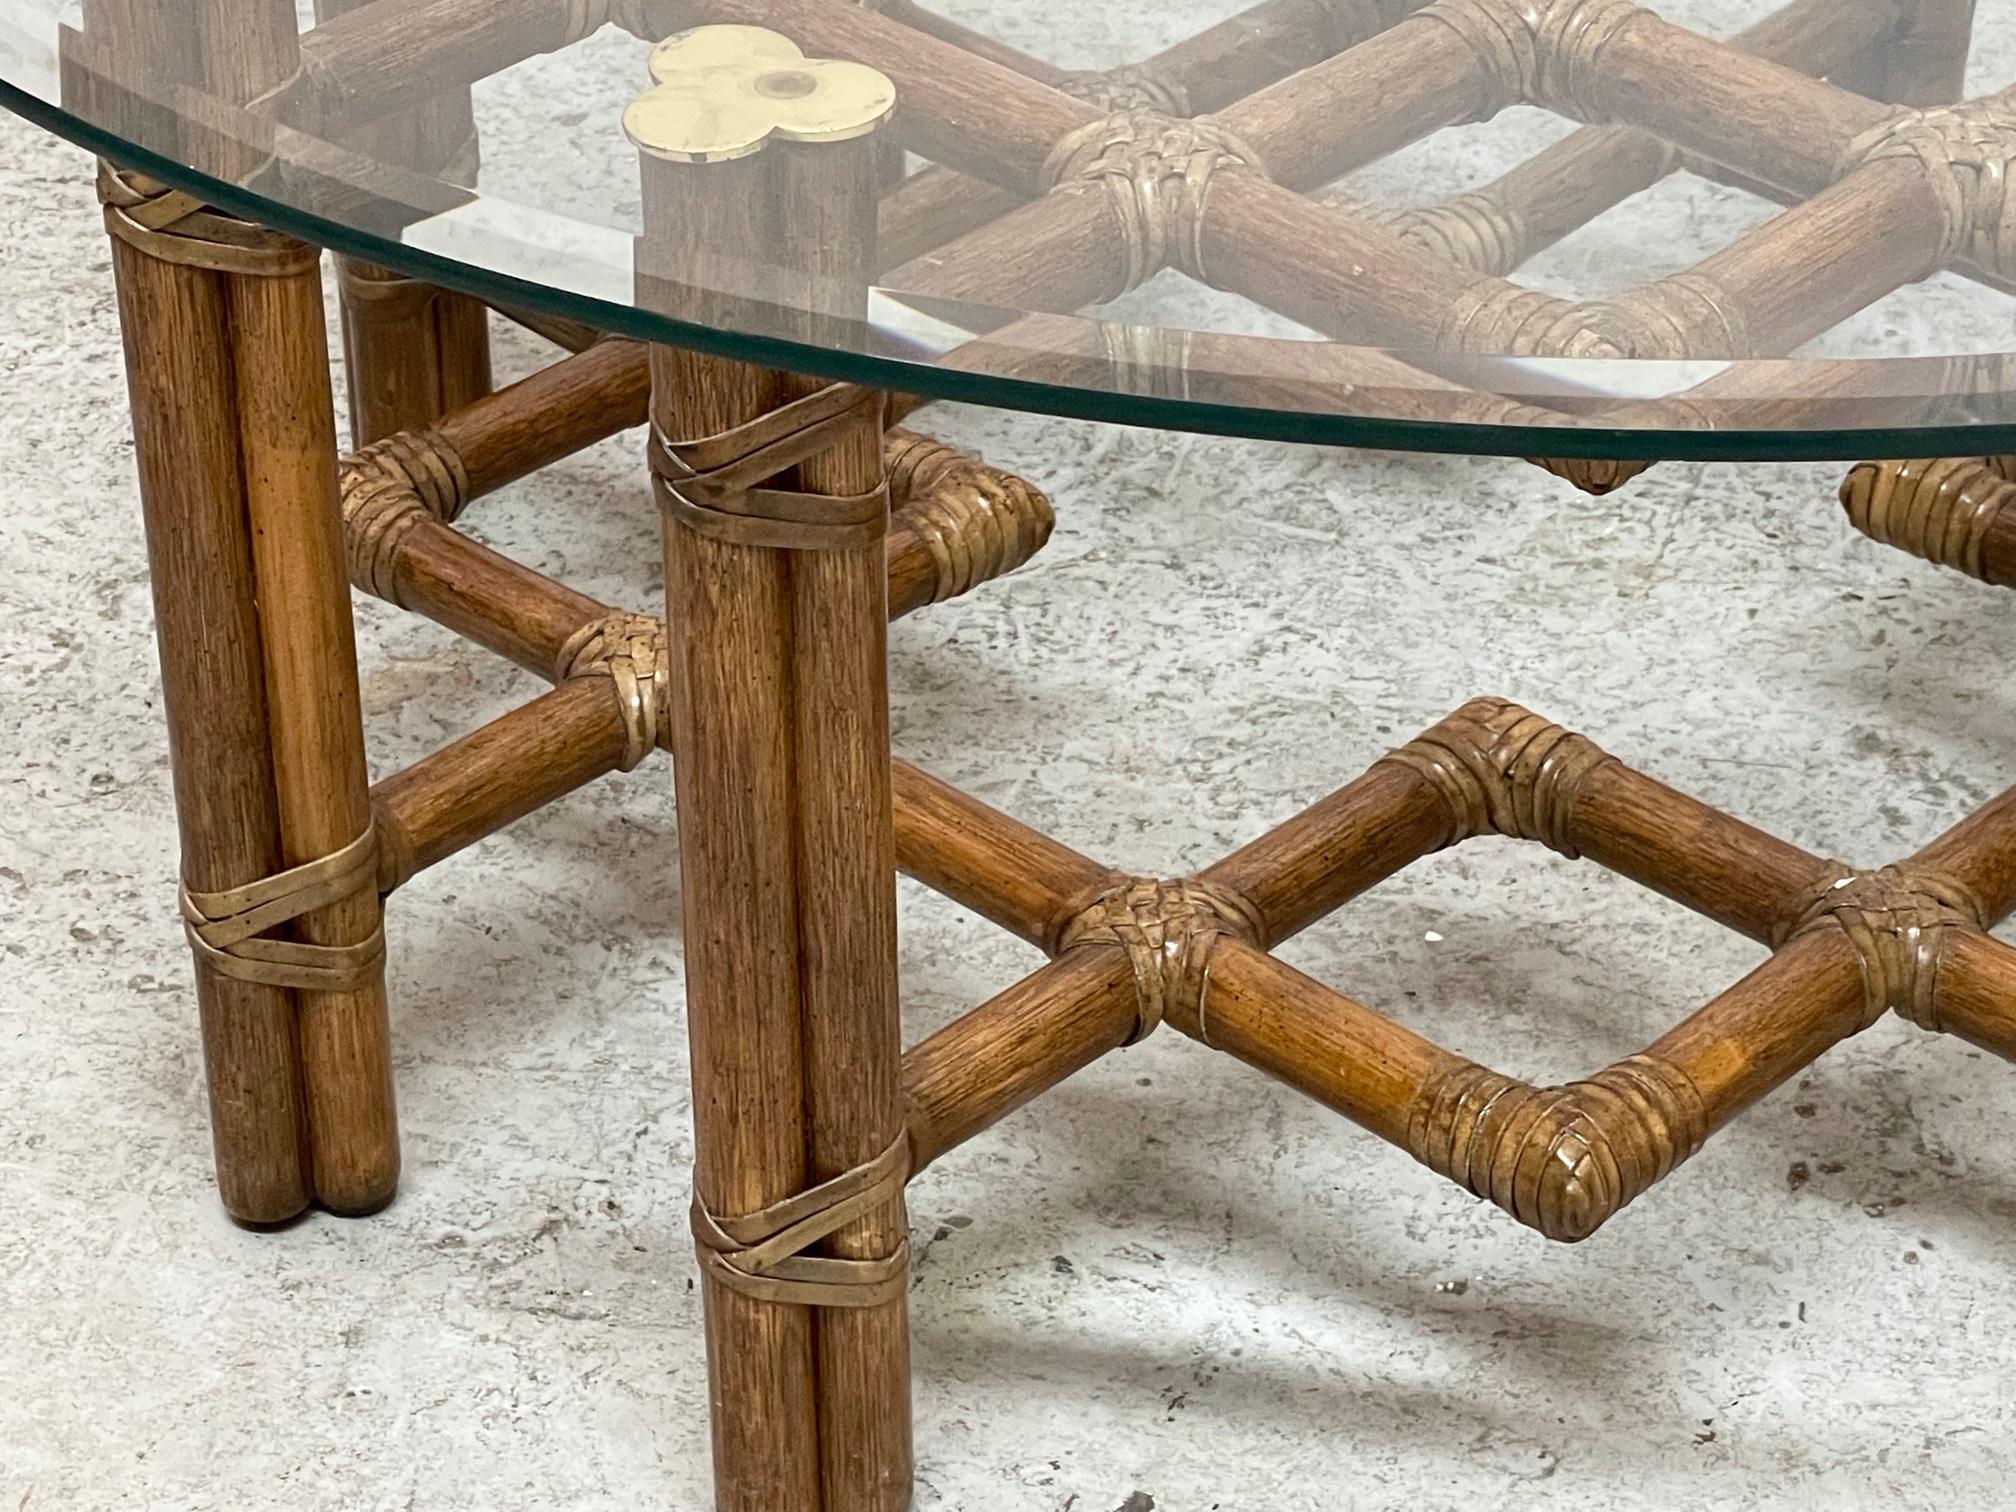 North American Rattan Chinese Chippendale Fretwork Coffee Table by McGuire